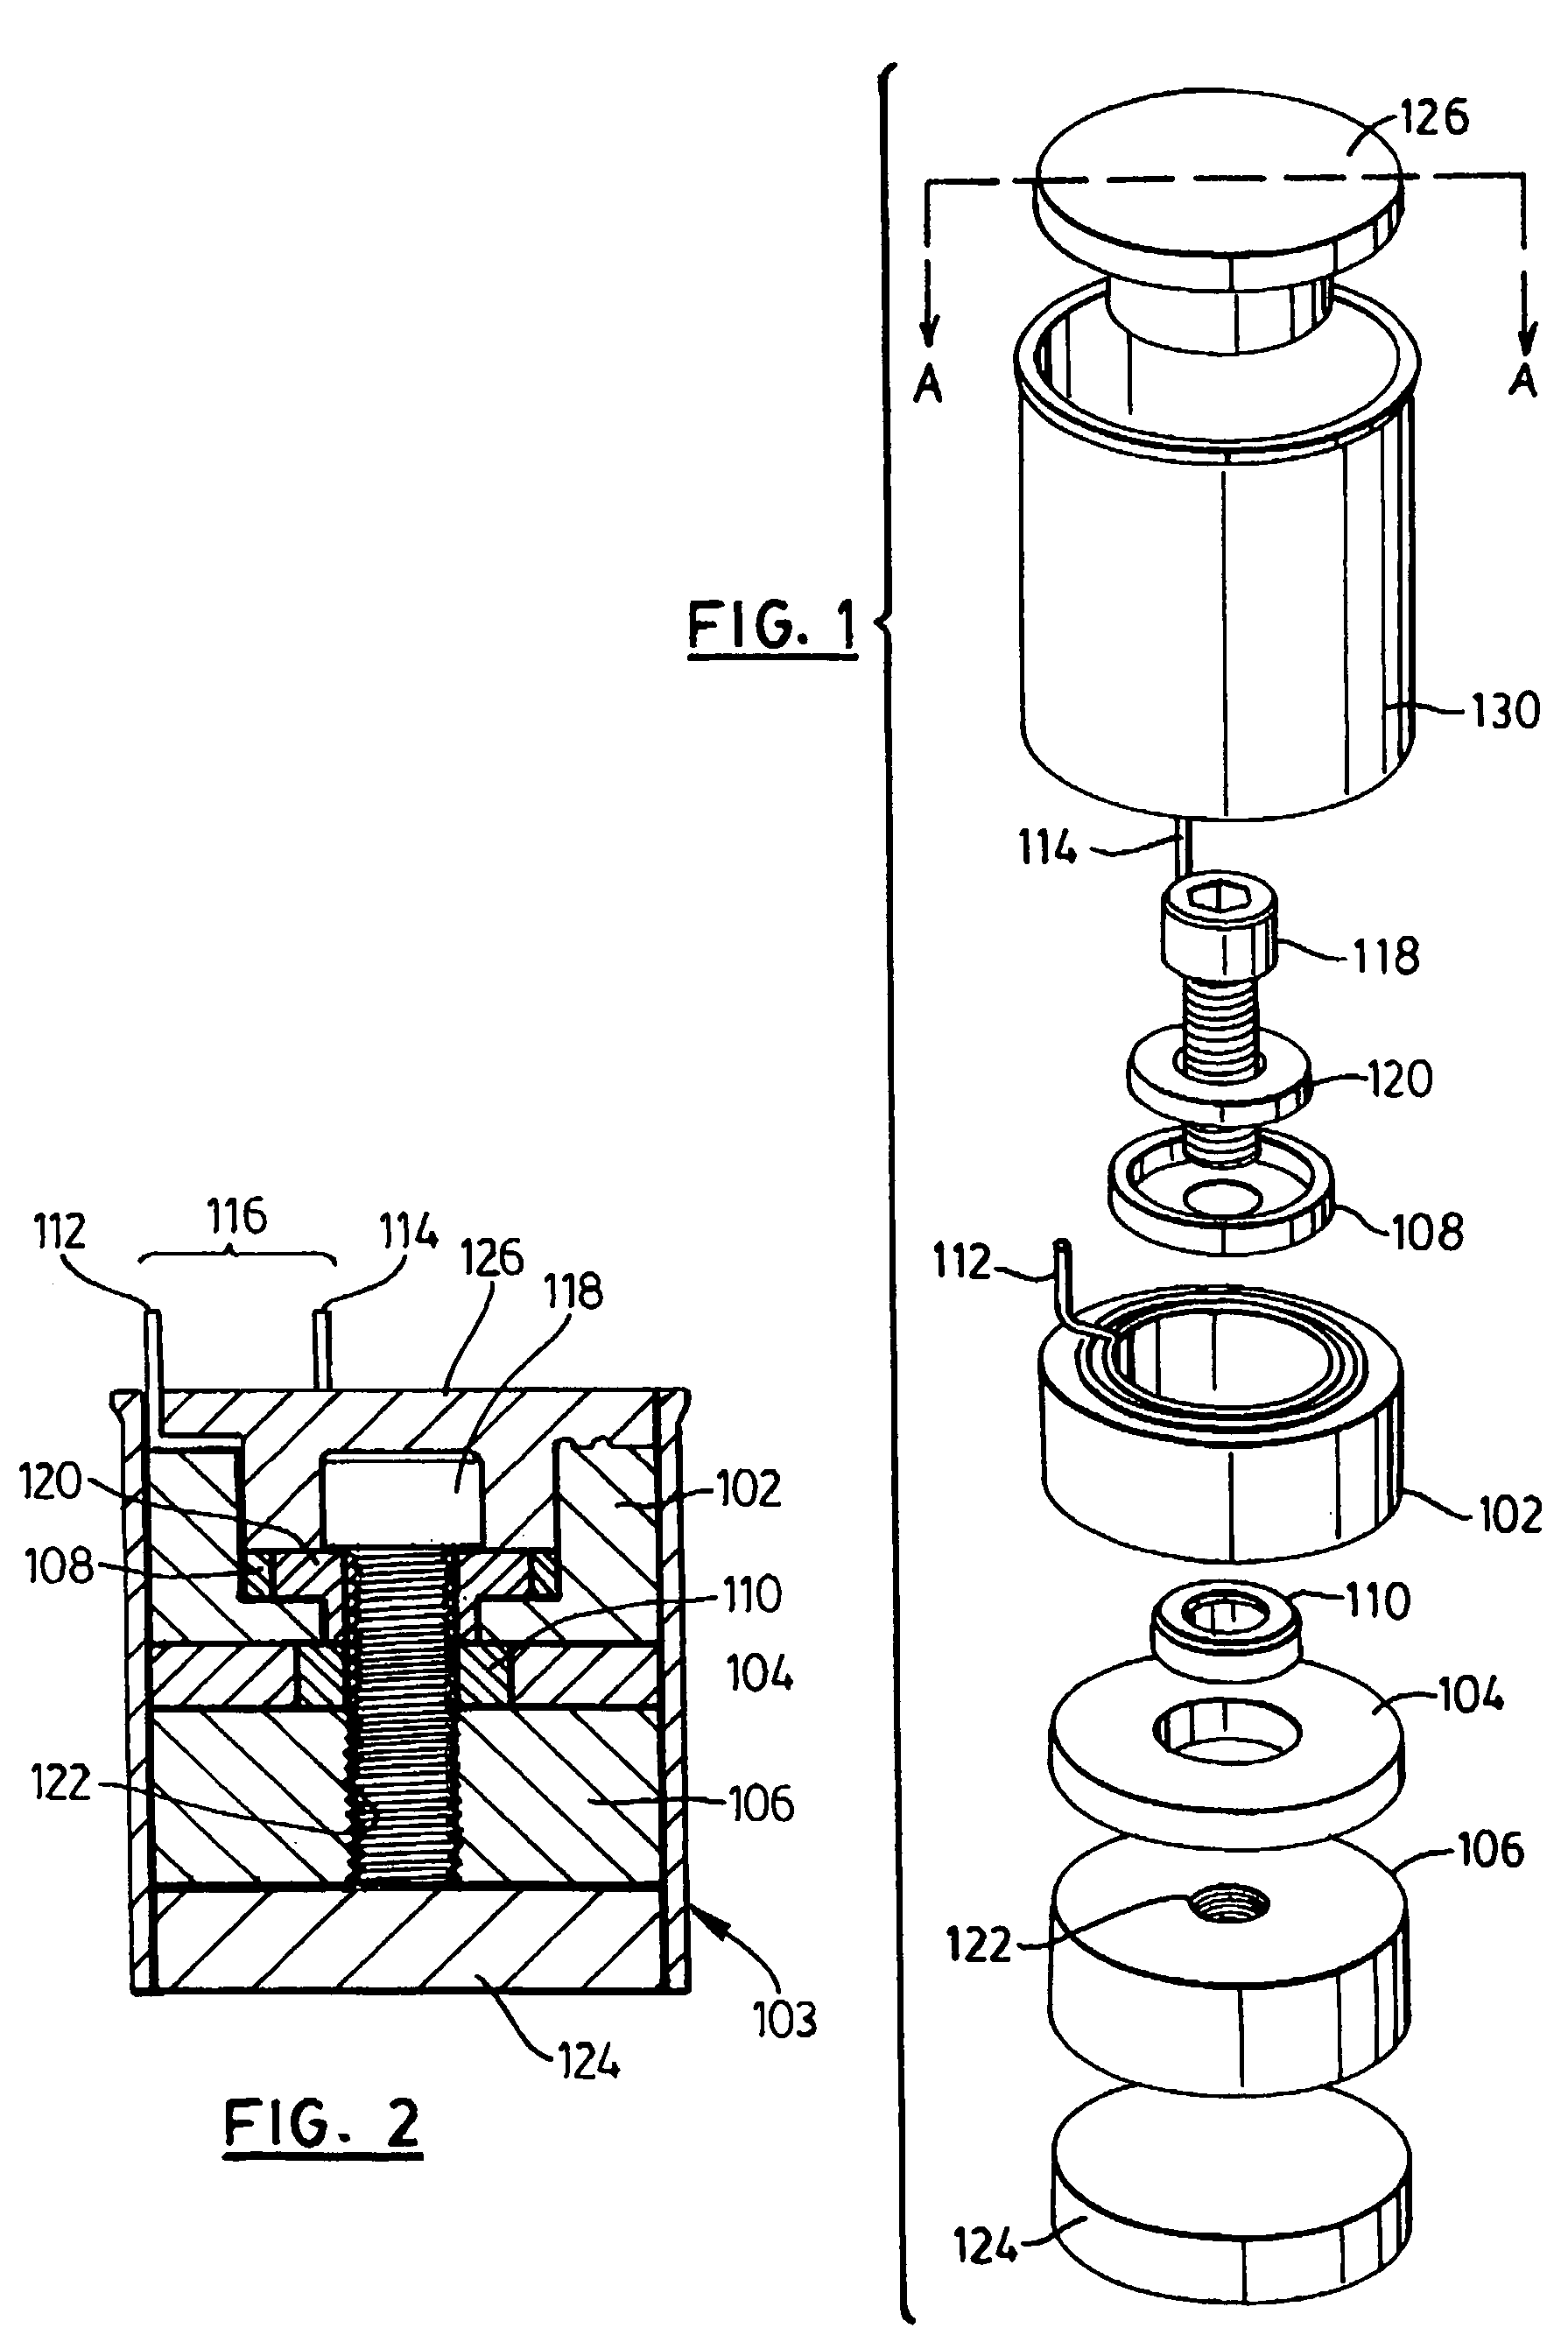 Method and apparatus for damping an ultrasonic transducer suitable for time of flight ranging and level measurement systems